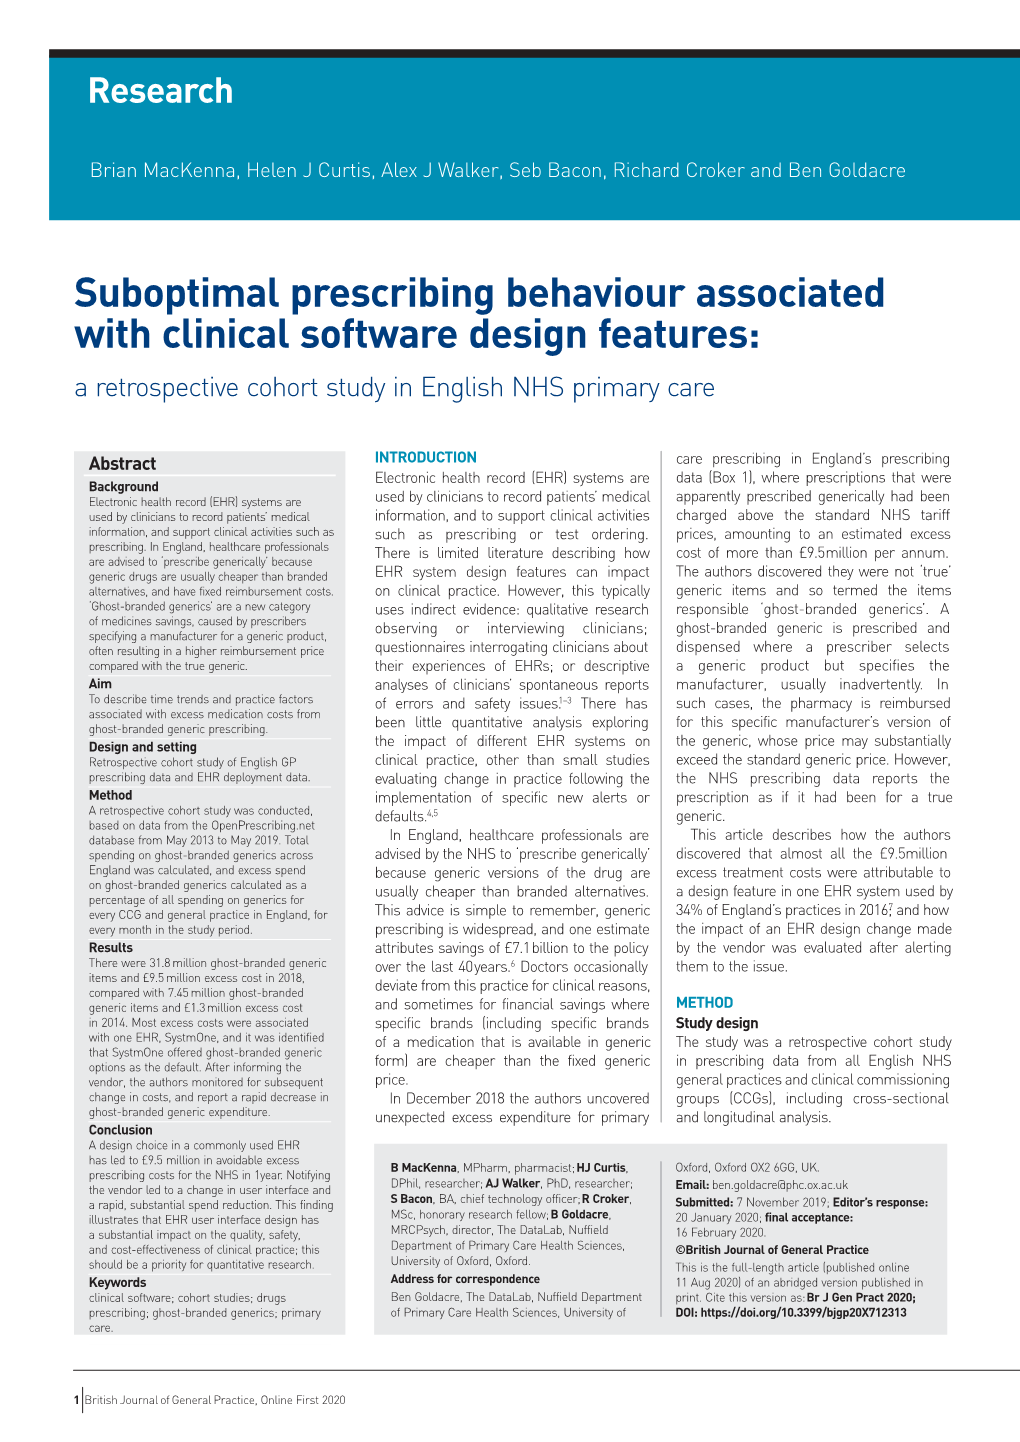 Suboptimal Prescribing Behaviour Associated with Clinical Software Design Features: a Retrospective Cohort Study in English NHS Primary Care